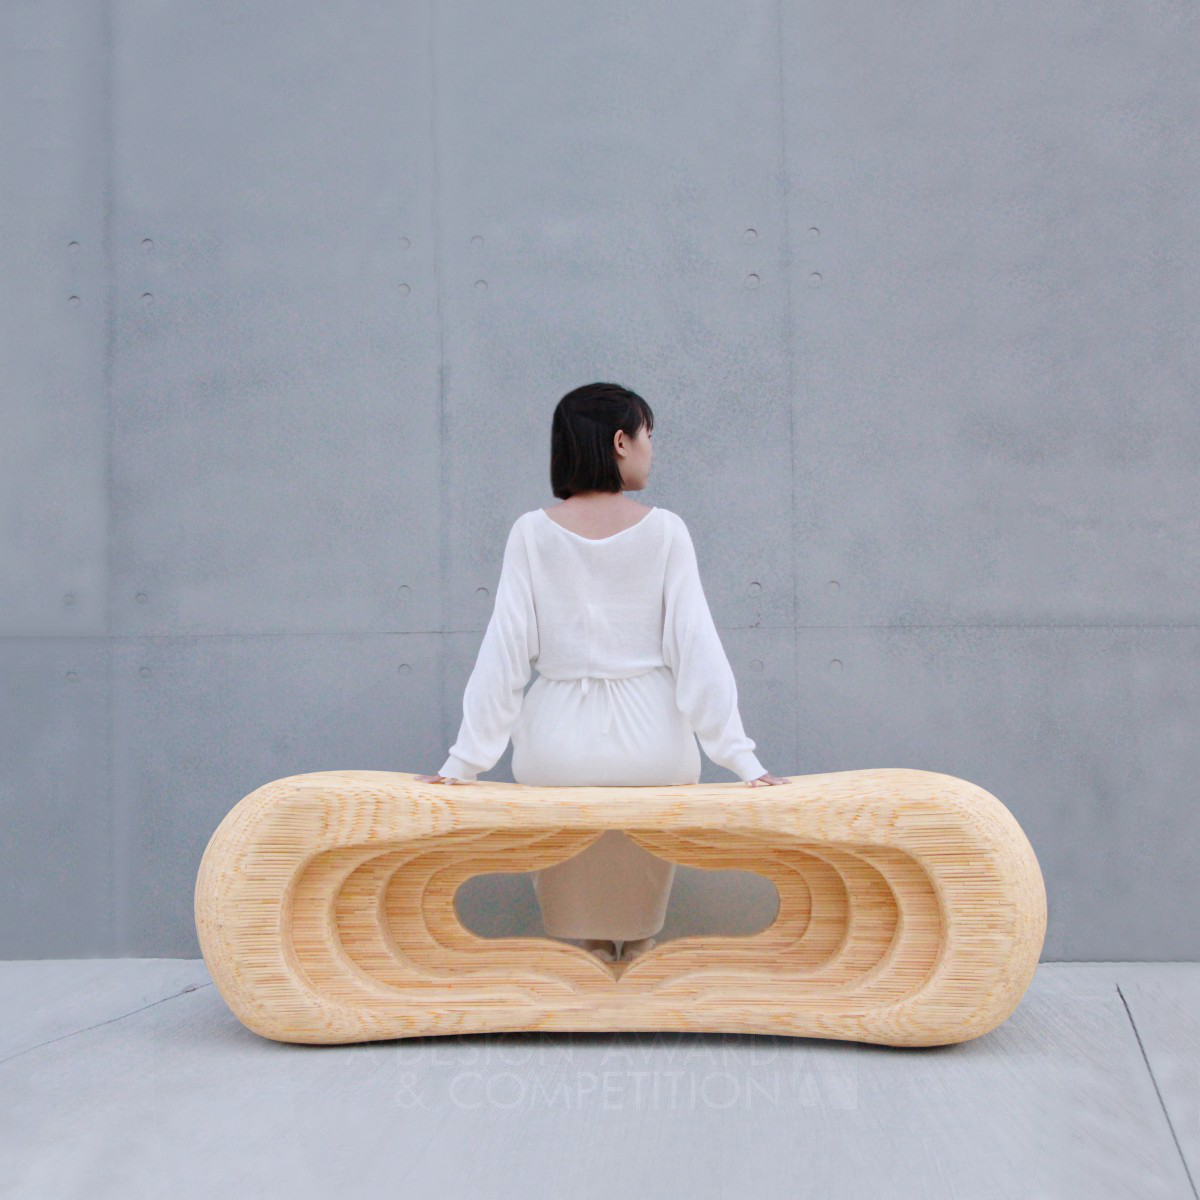 Chopstikbench: Redefining Street and Reception Furniture with Sustainable Design